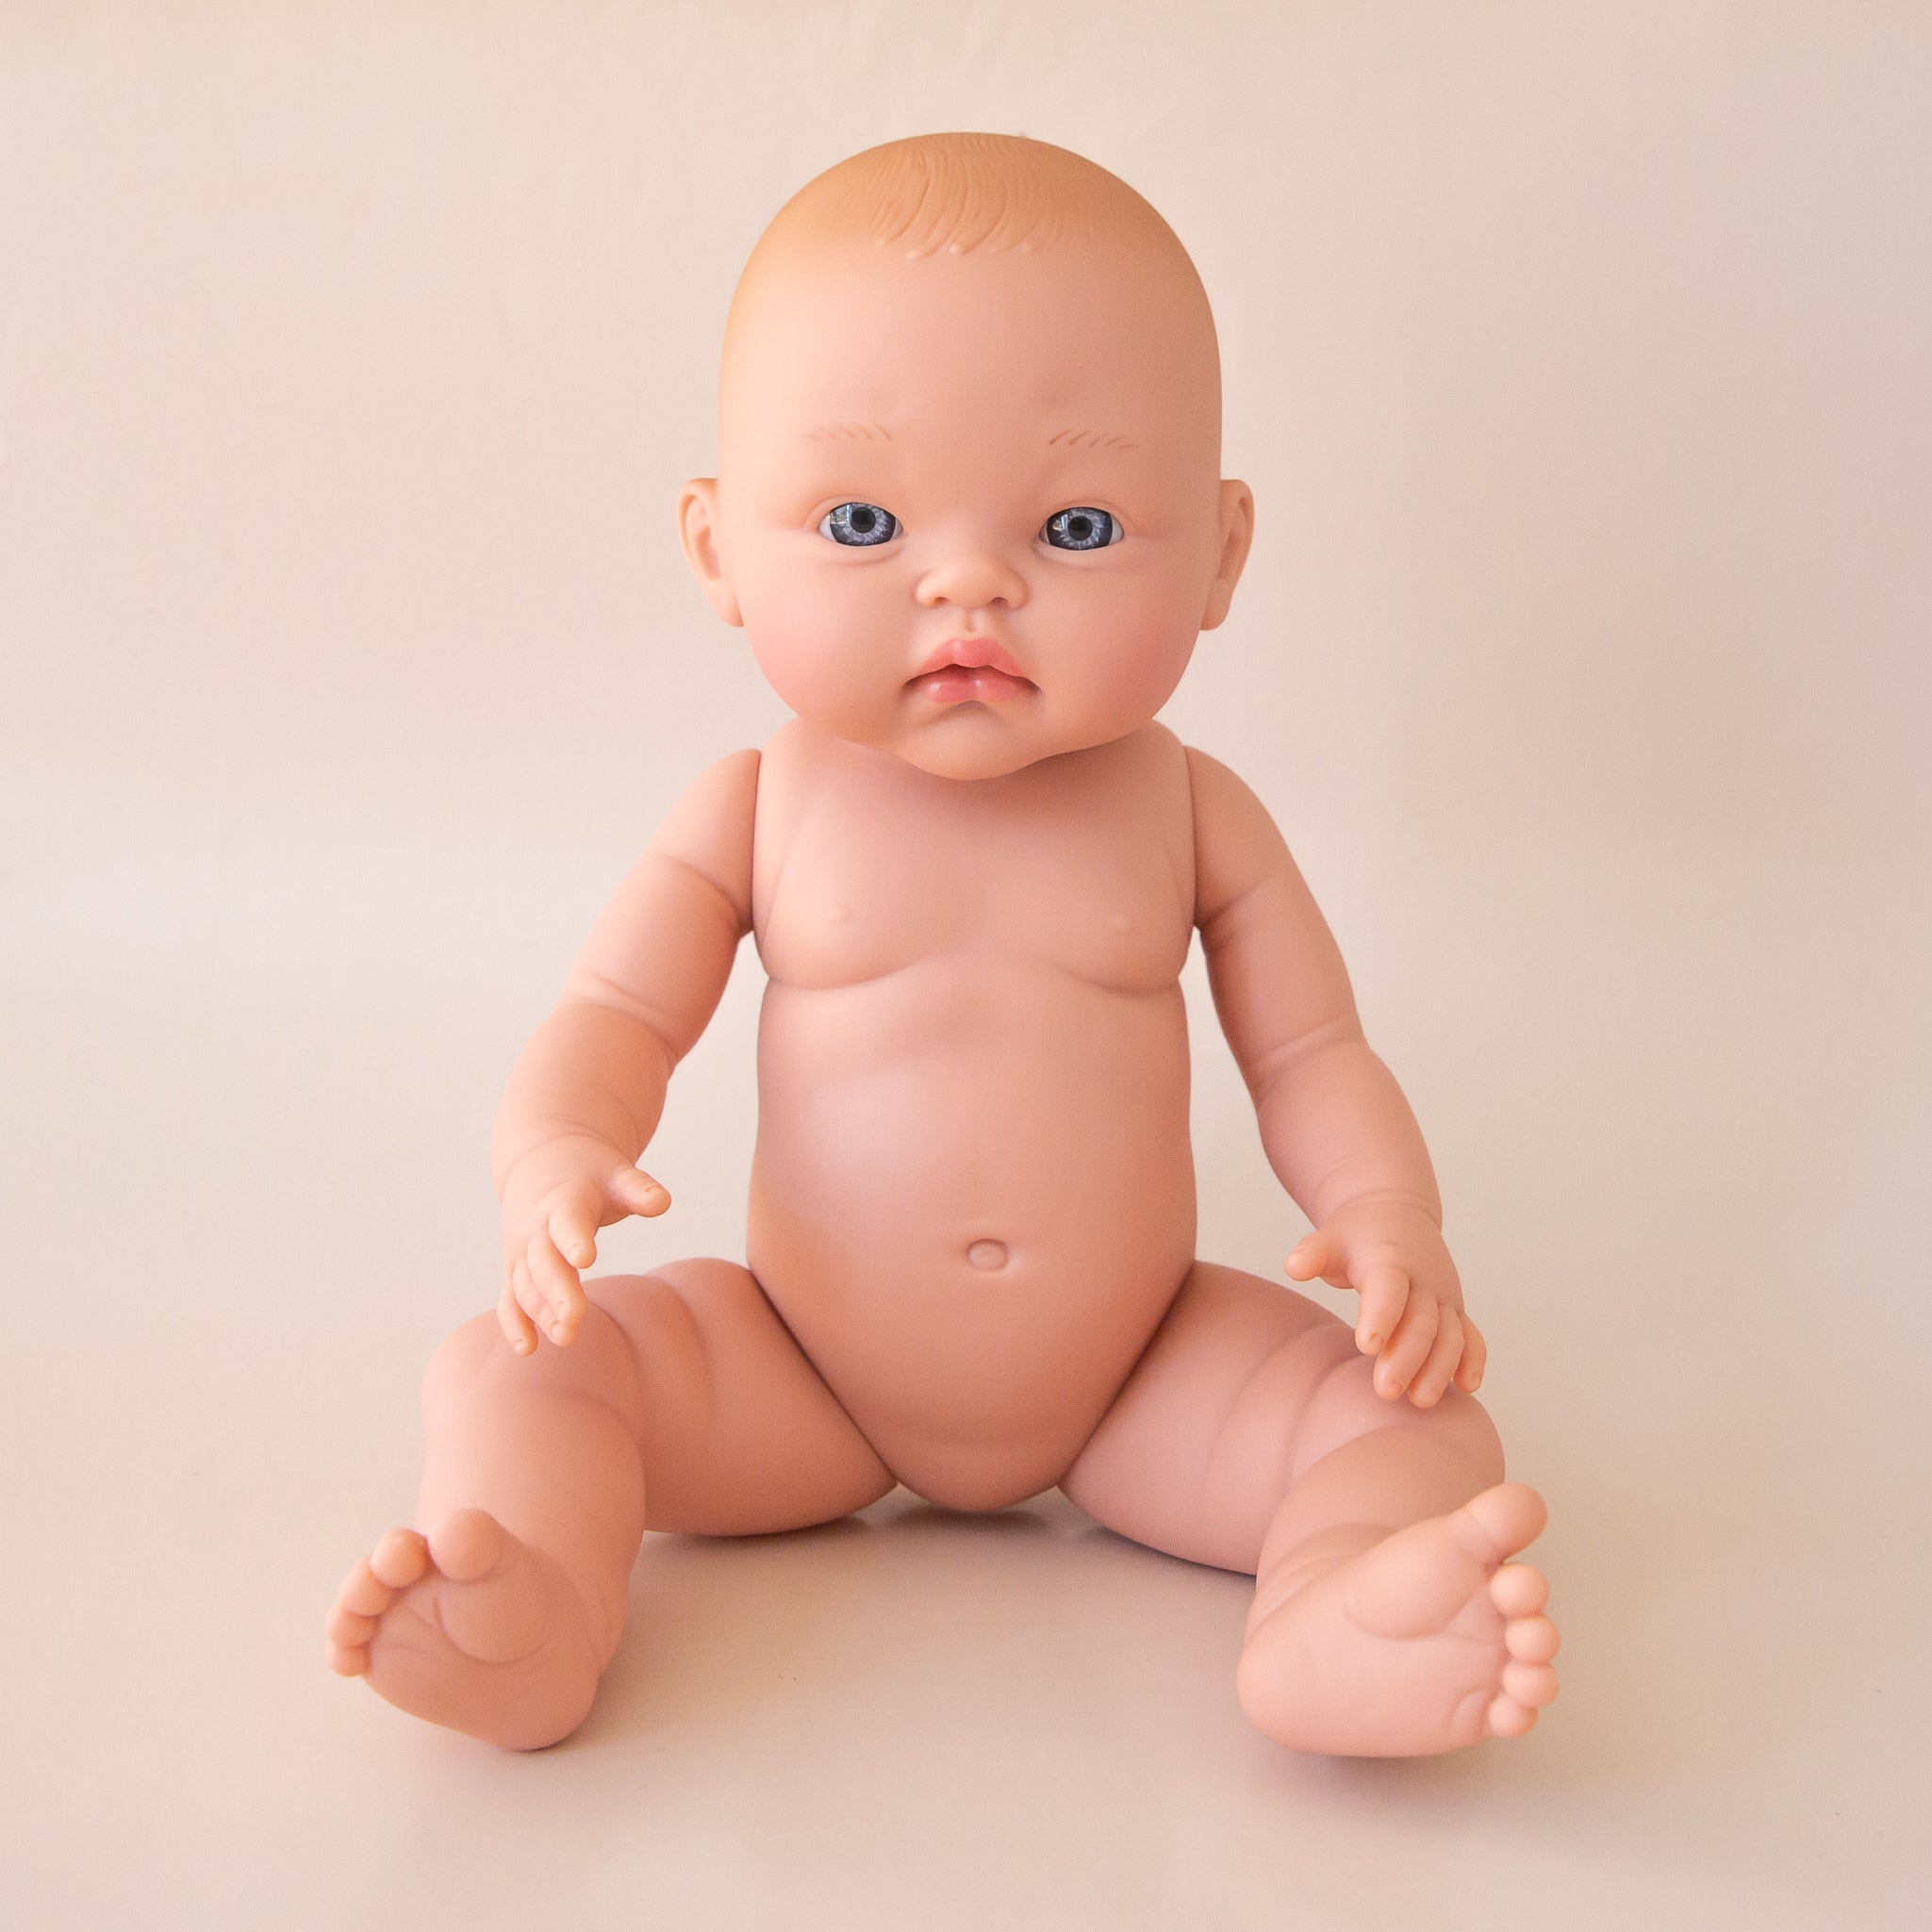 A baby doll with reddish hair and blue eyes. 